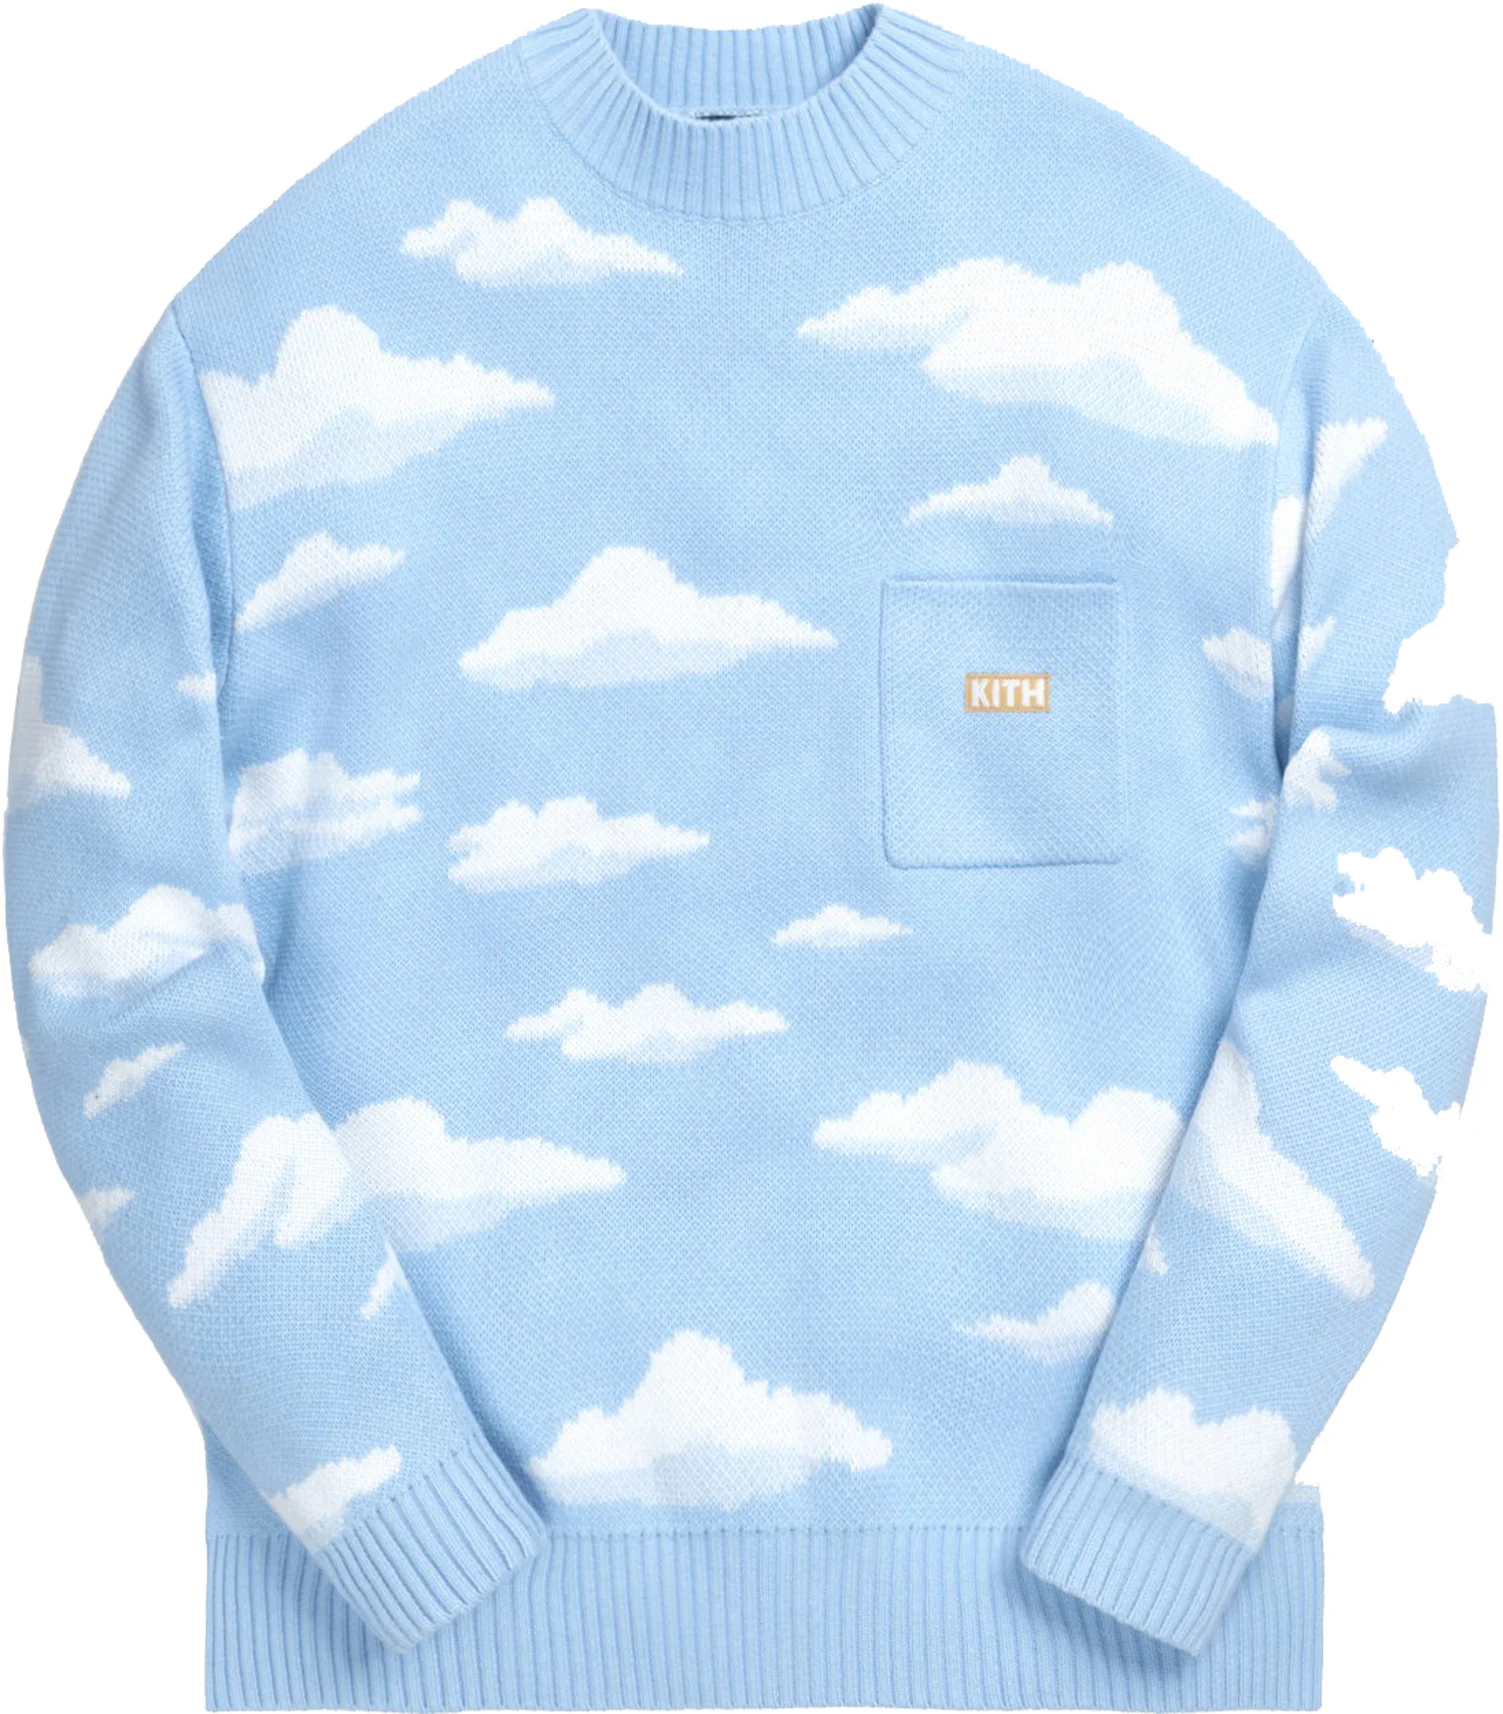 https://images.stockx.com/images/Kith-x-The-Simpsons-Cloud-Intarsia-Sweater-Blue.jpg?fit=fill&bg=FFFFFF&w=1200&h=857&fm=webp&auto=compress&dpr=2&trim=color&updated_at=1611607001&q=60